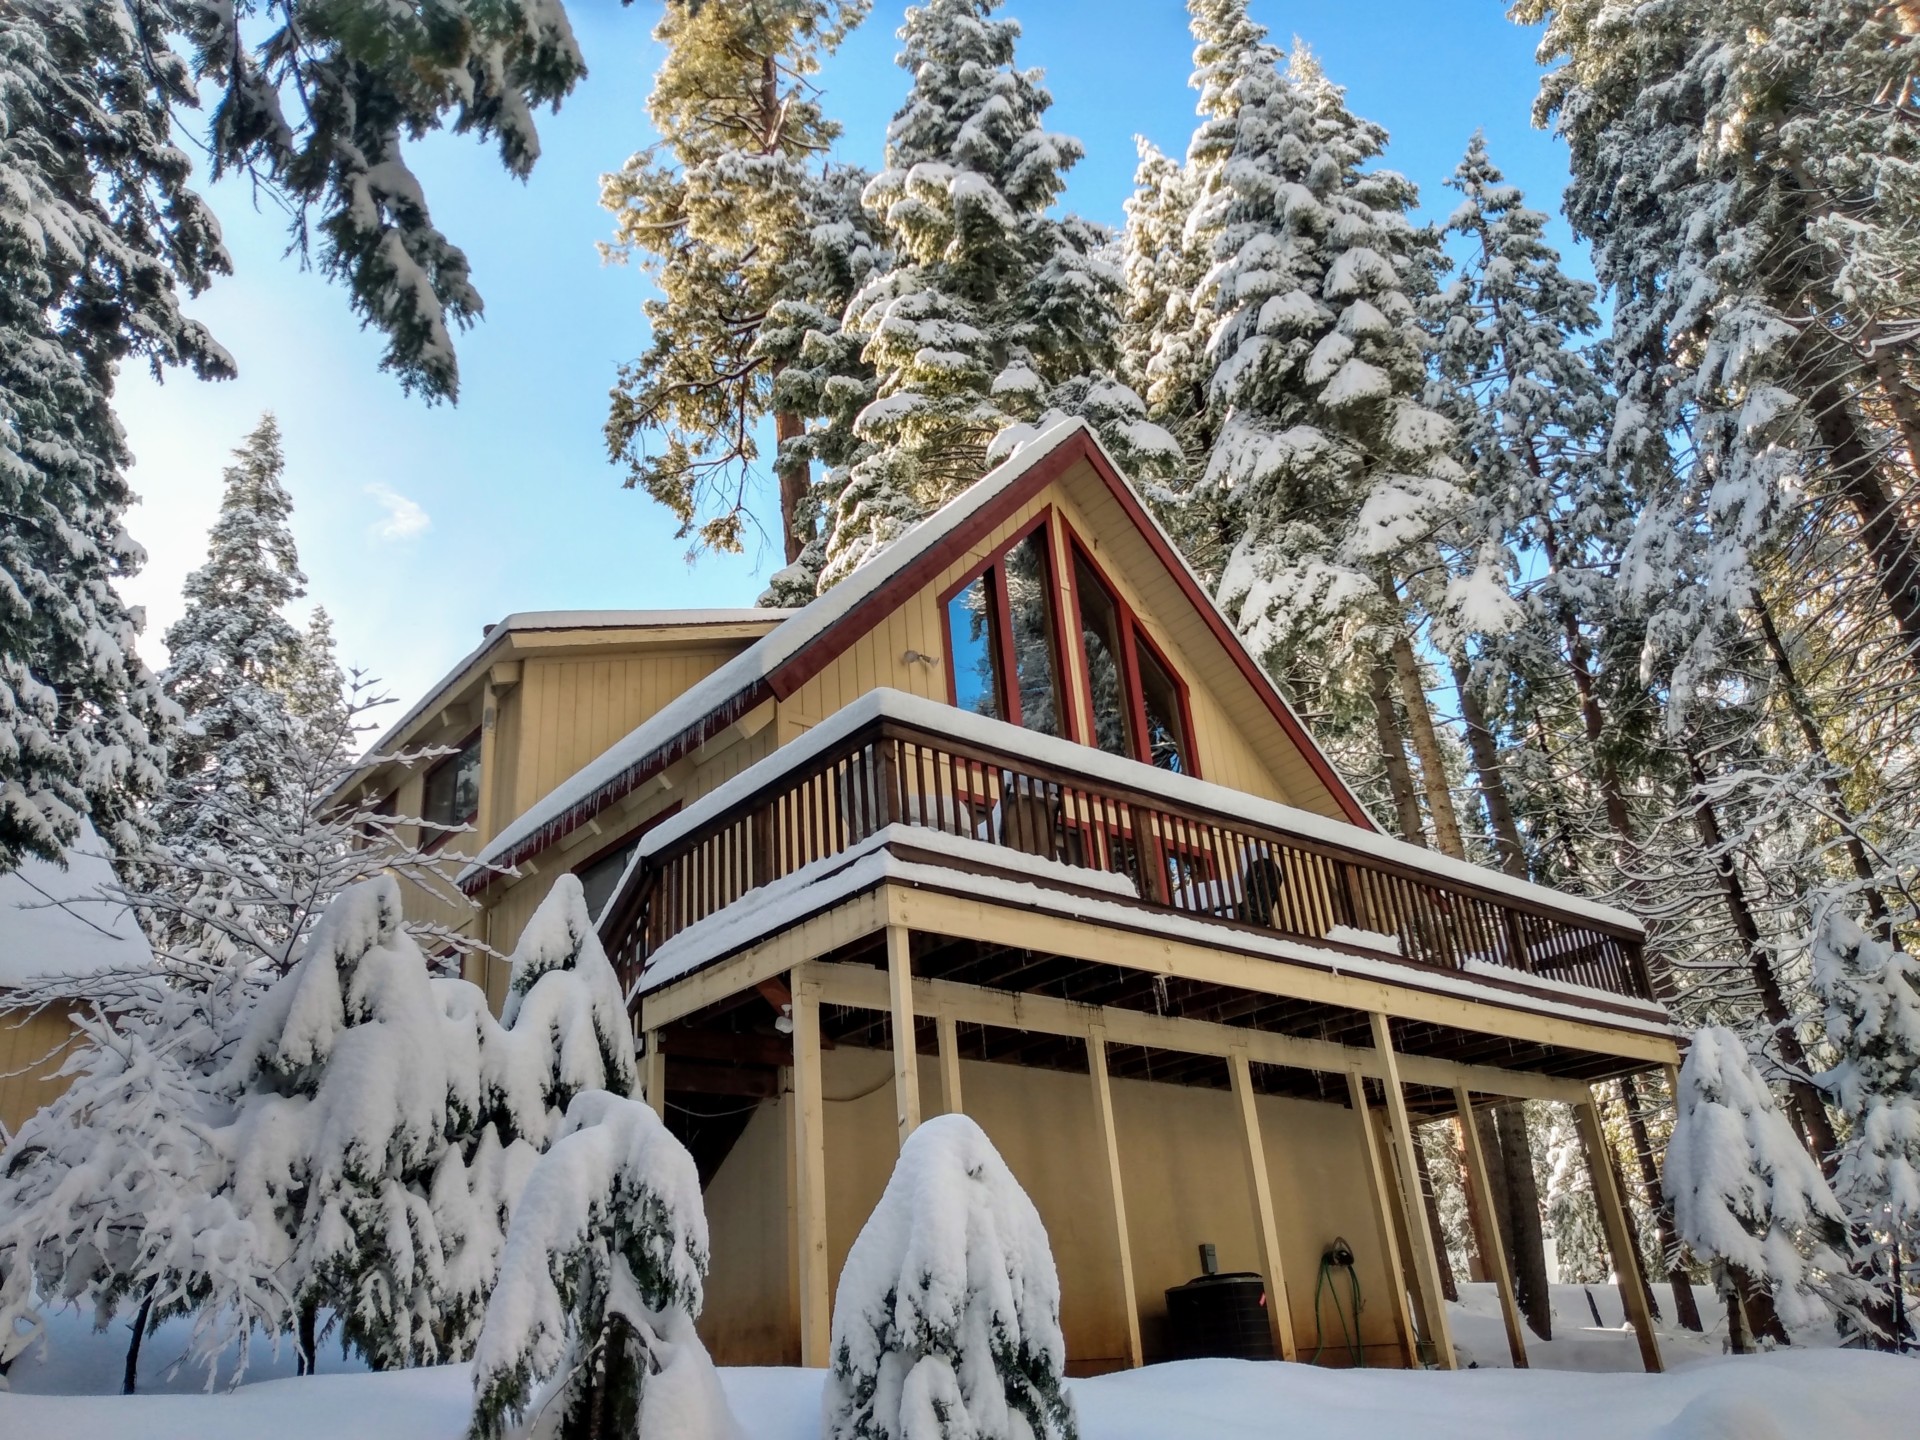 Dorrington Vacation Rental Cabins - Family-friendly cabins near Arnold covered in snow.
Keywords used: Family, pet-friendly